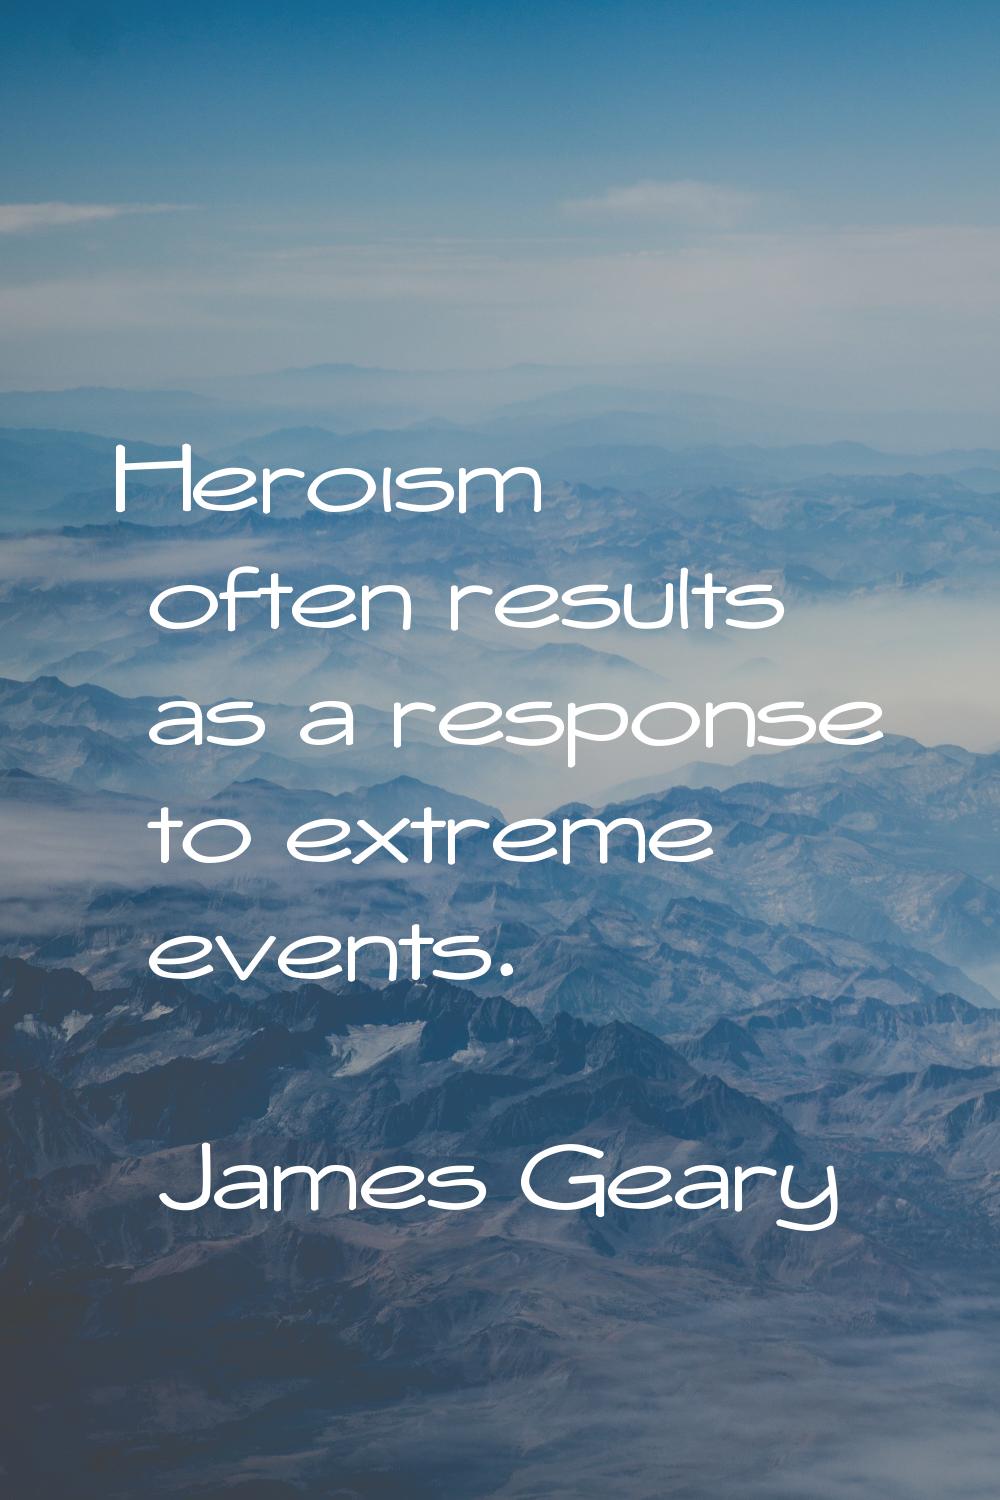 Heroism often results as a response to extreme events.